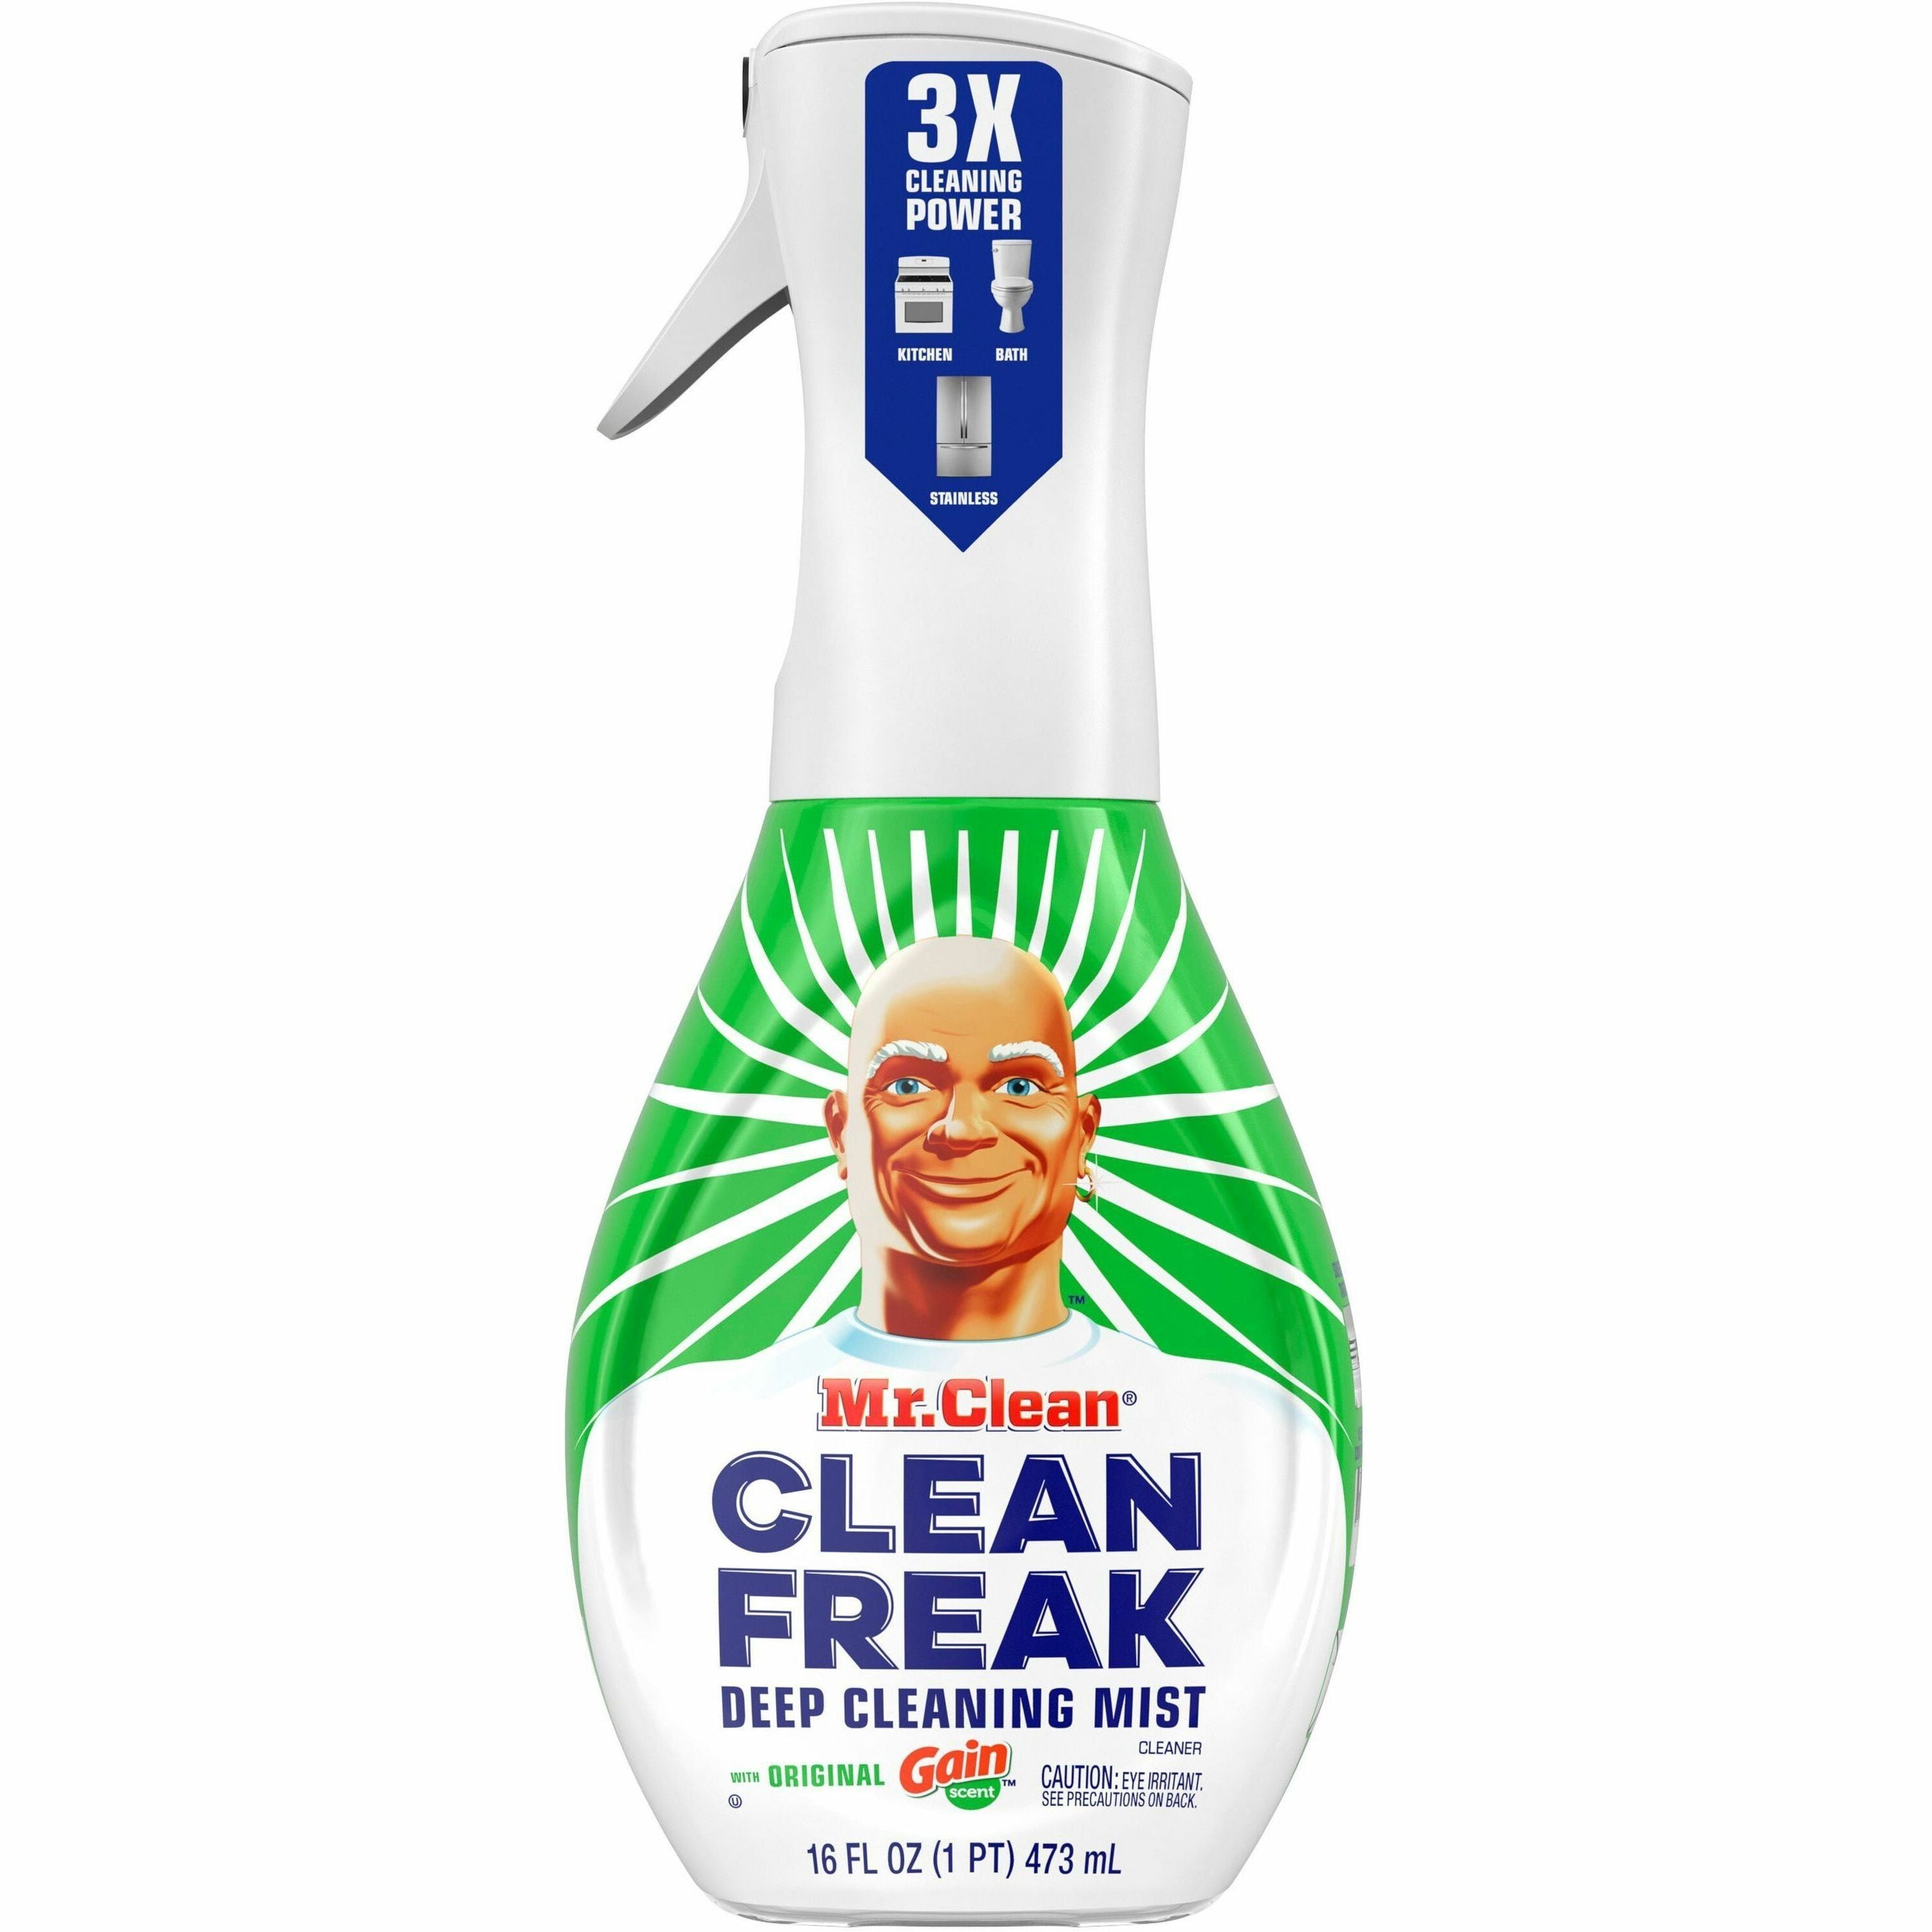 mr-clean-deep-cleaning-mist-16-fl-oz-05-quart-gain-scent-6-carton-easy-to-use-disinfectant-deodorize-multi_pgc79127ct - 1